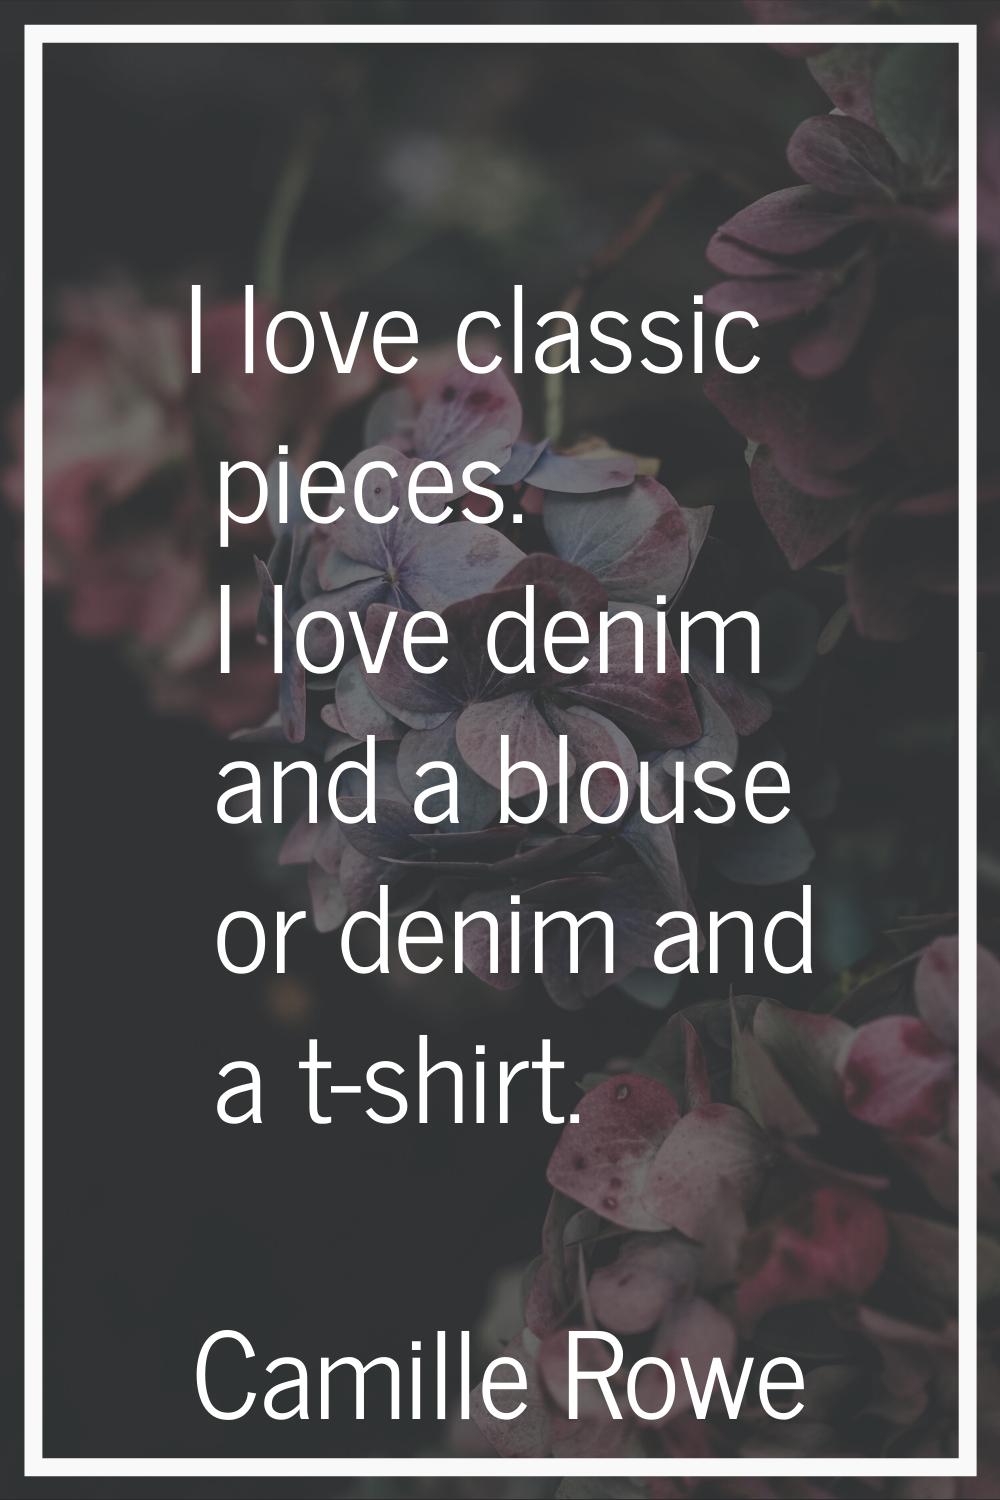 I love classic pieces. I love denim and a blouse or denim and a t-shirt.